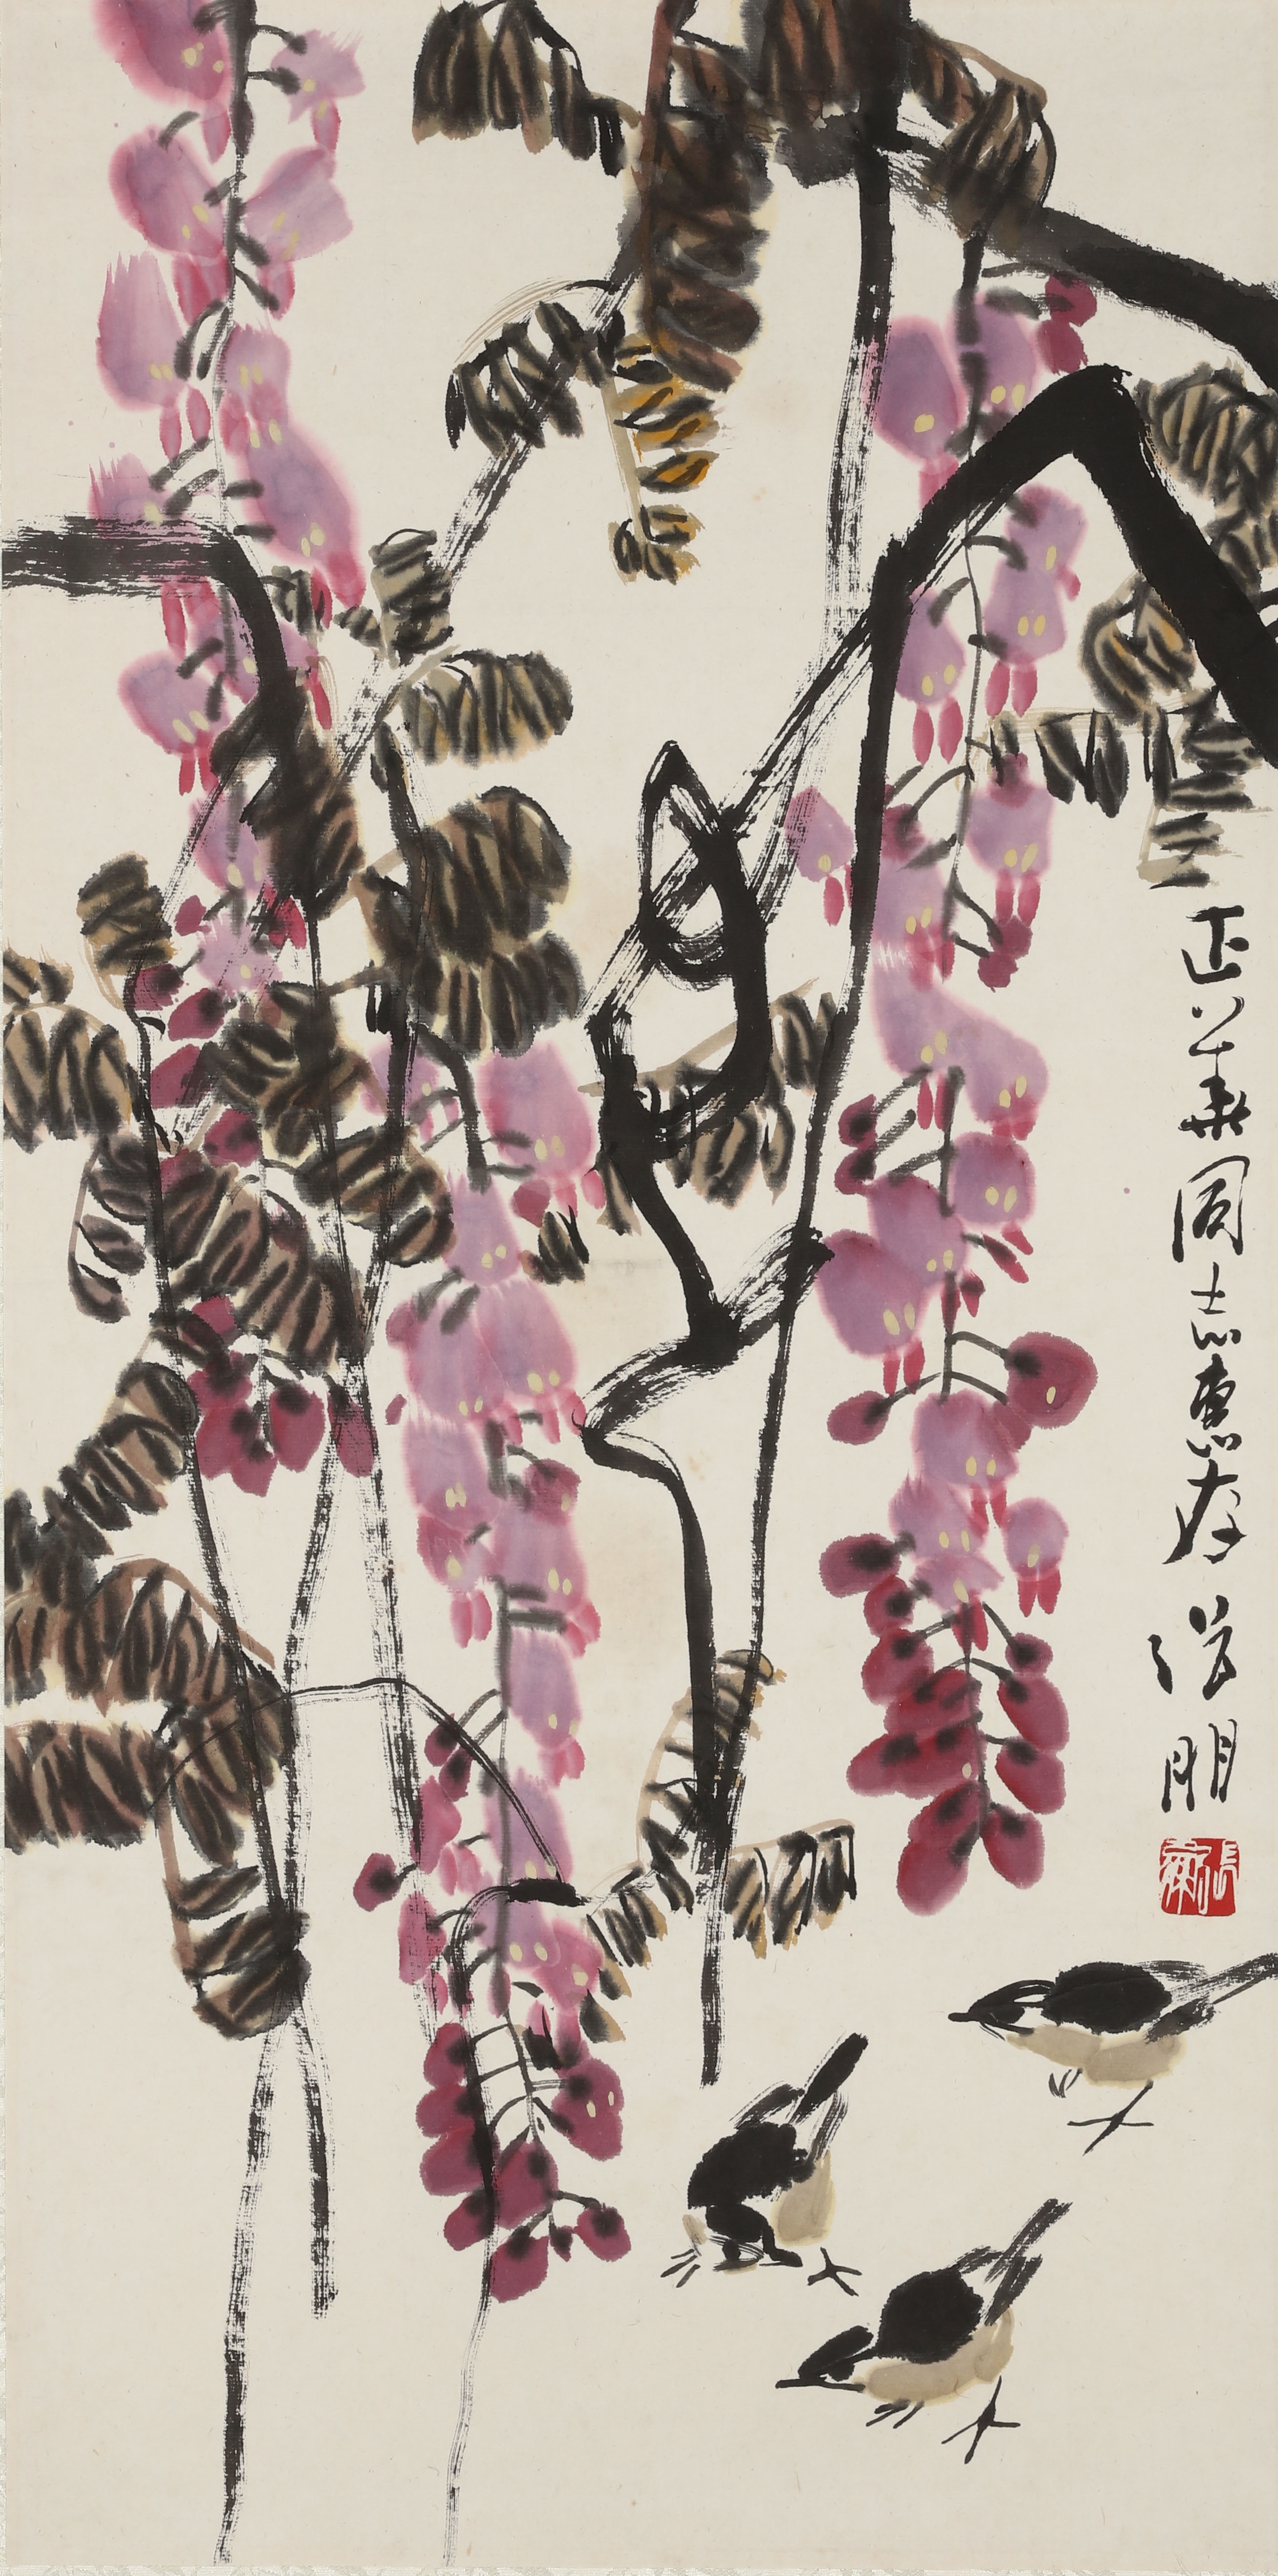 WISTERIA AND SPARROWS - Zhang Peng